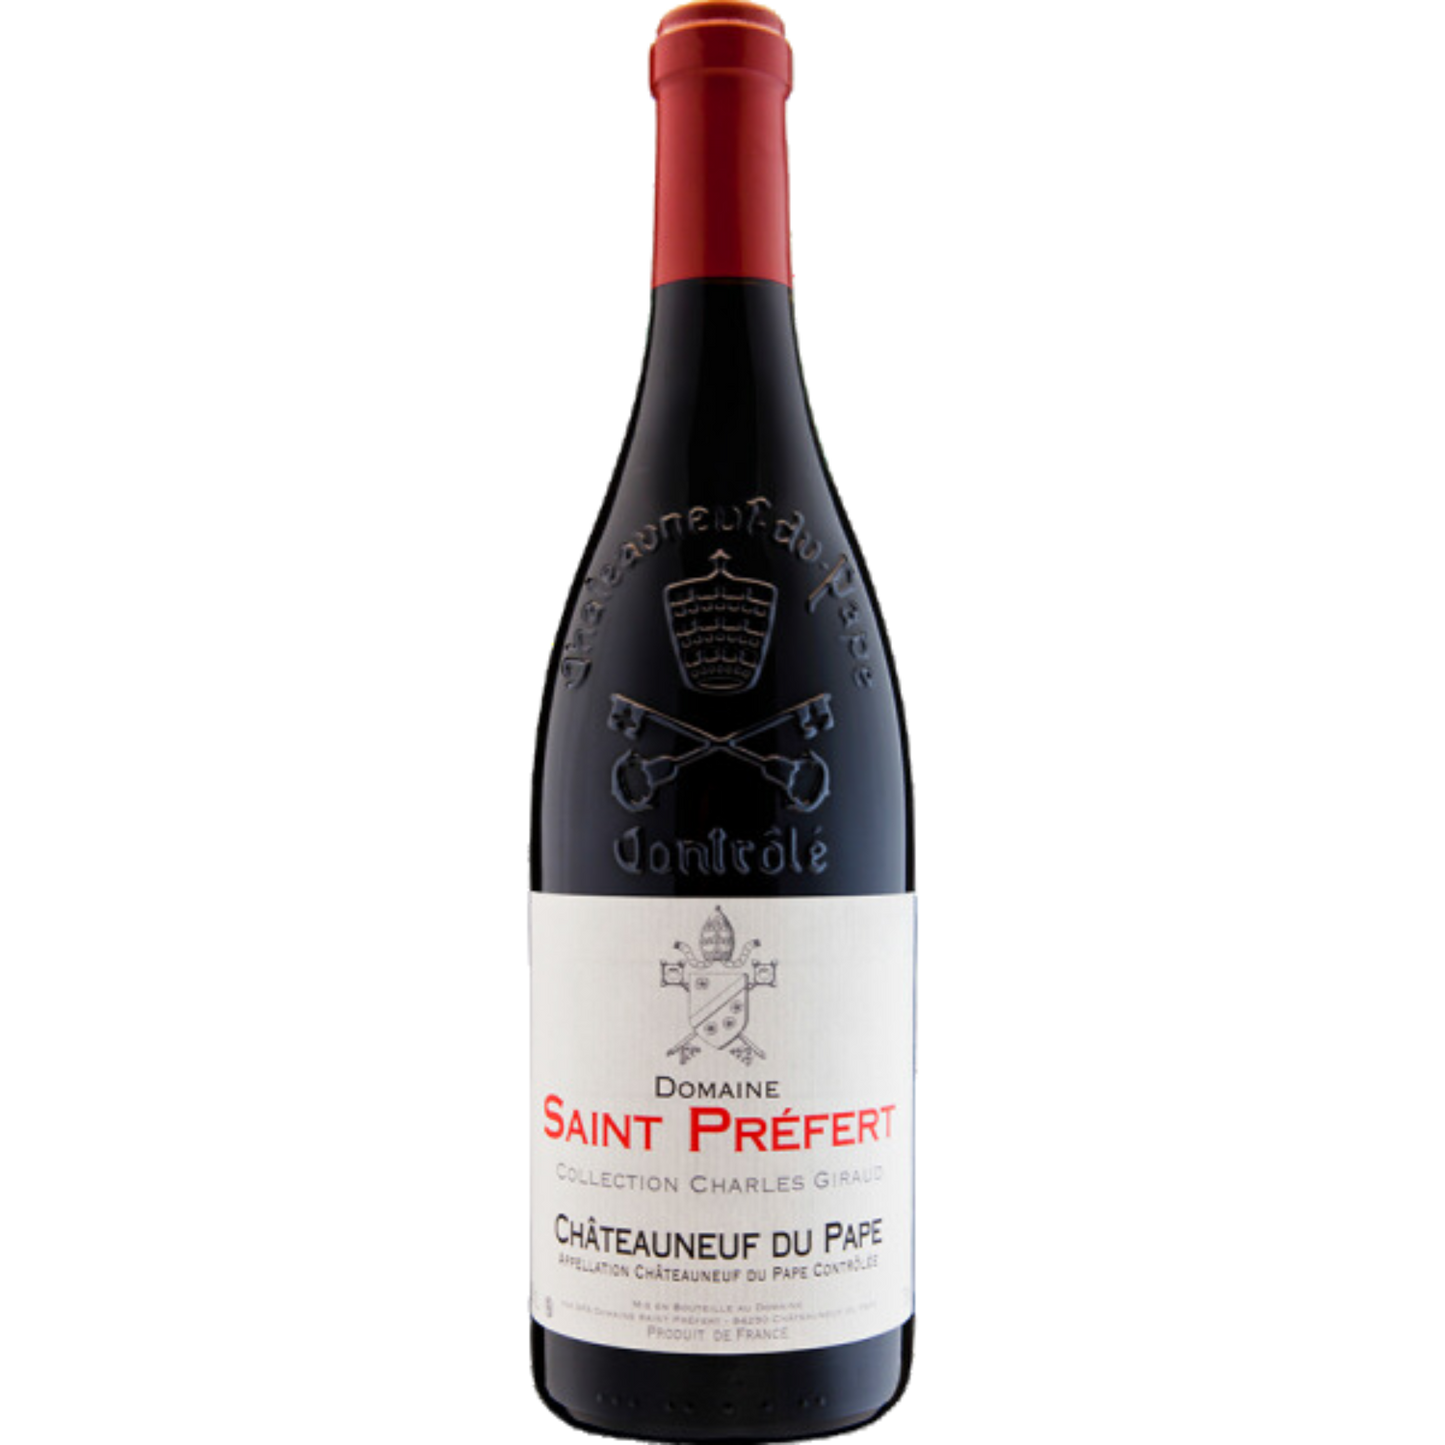 Domaine Saint Prefert: Chateauneuf-du-Pape, Collection Charles Giraud 2019